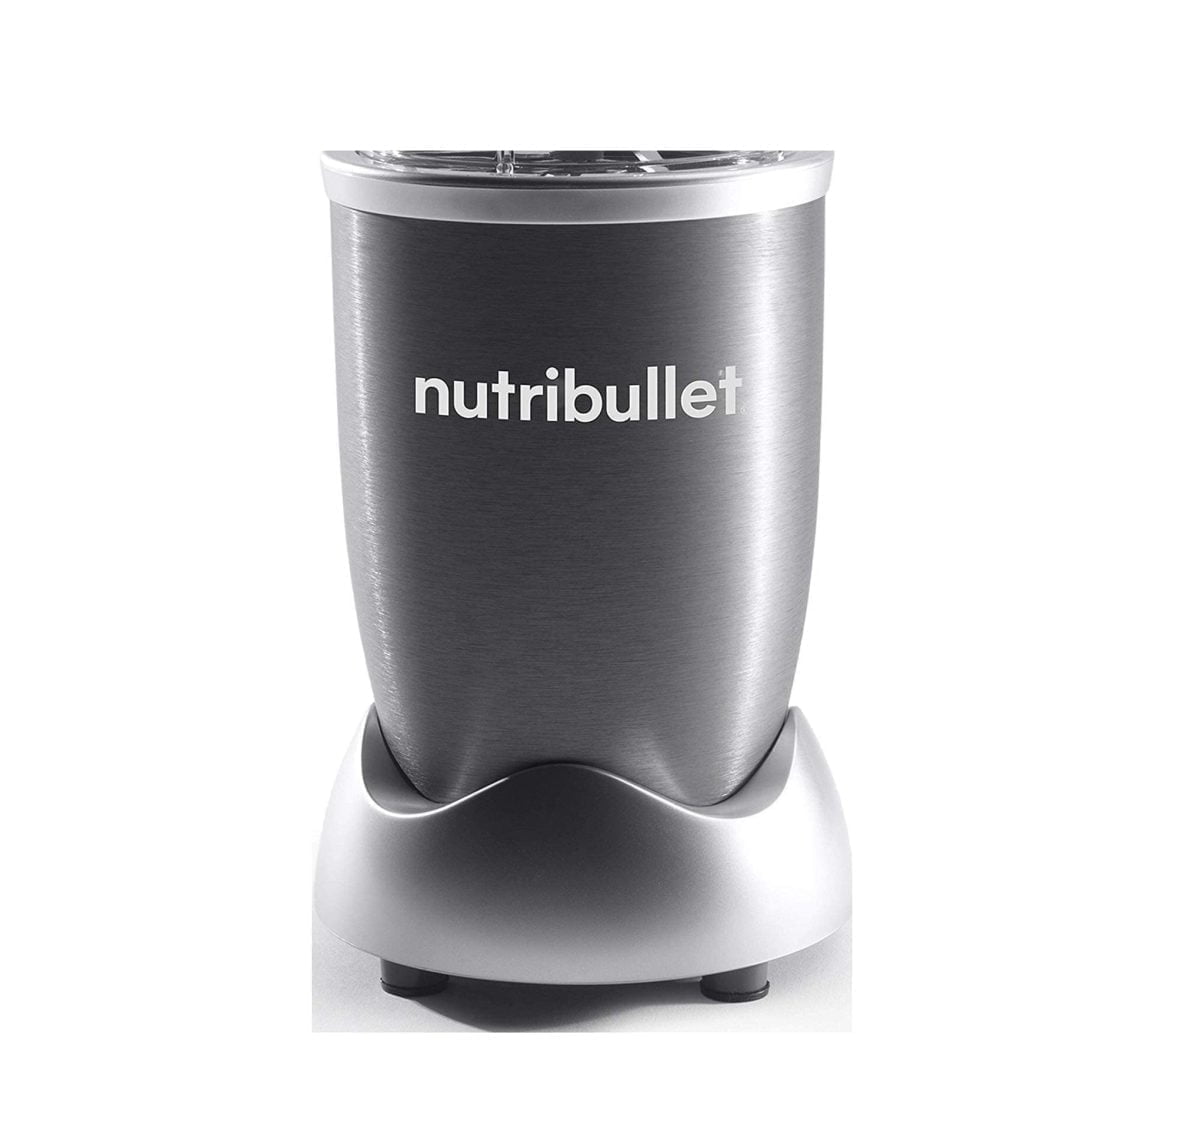 71D2Ml1Rbdl. Ac Sl1500 Nutribullet &Lt;Ul Class=&Quot;A-Unordered-List A-Vertical A-Spacing-Mini&Quot;&Gt; &Lt;Li&Gt;&Lt;Span Class=&Quot;A-List-Item&Quot;&Gt;Meet The Most Popular Nutribullet, Our Compact-Yet-Powerful Personal Blender. You Choose What Goes In To Get The Most Out Of Every Ingredient, Every Day.&Lt;/Span&Gt;&Lt;/Li&Gt; &Lt;Li&Gt;&Lt;Span Class=&Quot;A-List-Item&Quot;&Gt;The Nutribullet Is The Fastest, Easiest Solution For Making Nutrient-Packed Smoothies. Load It Up With Your Favorite Whole Foods Like Nuts, Berries, And Spinach, Then Push, Twist, And Blend Your Way To A Healthier Lifestyle.&Lt;/Span&Gt;&Lt;/Li&Gt; &Lt;Li&Gt;&Lt;Span Class=&Quot;A-List-Item&Quot;&Gt;Powerful 600-Watt Motor And Refined Nutrient-Extraction Blades Blend Whole Foods Into Liquid Fuel For Your Body - In Seconds.&Lt;/Span&Gt;&Lt;/Li&Gt; &Lt;Li&Gt;&Lt;Span Class=&Quot;A-List-Item&Quot;&Gt;Hassle-Free Cleaning - Simply Twist Off The Blade, Rinse With Soap And Water, And Put The Cups In The Top Rack Of The Dishwasher.&Lt;/Span&Gt;&Lt;/Li&Gt; &Lt;Li&Gt;&Lt;Span Class=&Quot;A-List-Item&Quot;&Gt;What You Get: (1) 600 Watt Motor Base, (1) Extractor Blade, (1) 700Ml Cup, (1) 500Ml Cup, (1) Lip Ring With Handle, (1) Solid Lid, (1) User Guide, (1) Recipe Book. 2 Years Brand Warranty&Lt;/Span&Gt;&Lt;/Li&Gt; &Lt;/Ul&Gt; Nutribullet Nutribullet 600 Watts, 8 Piece Set, Multi-Function High Speed Blender, Mixer System With Nutrient Extractor, Smoothie Maker, Gray